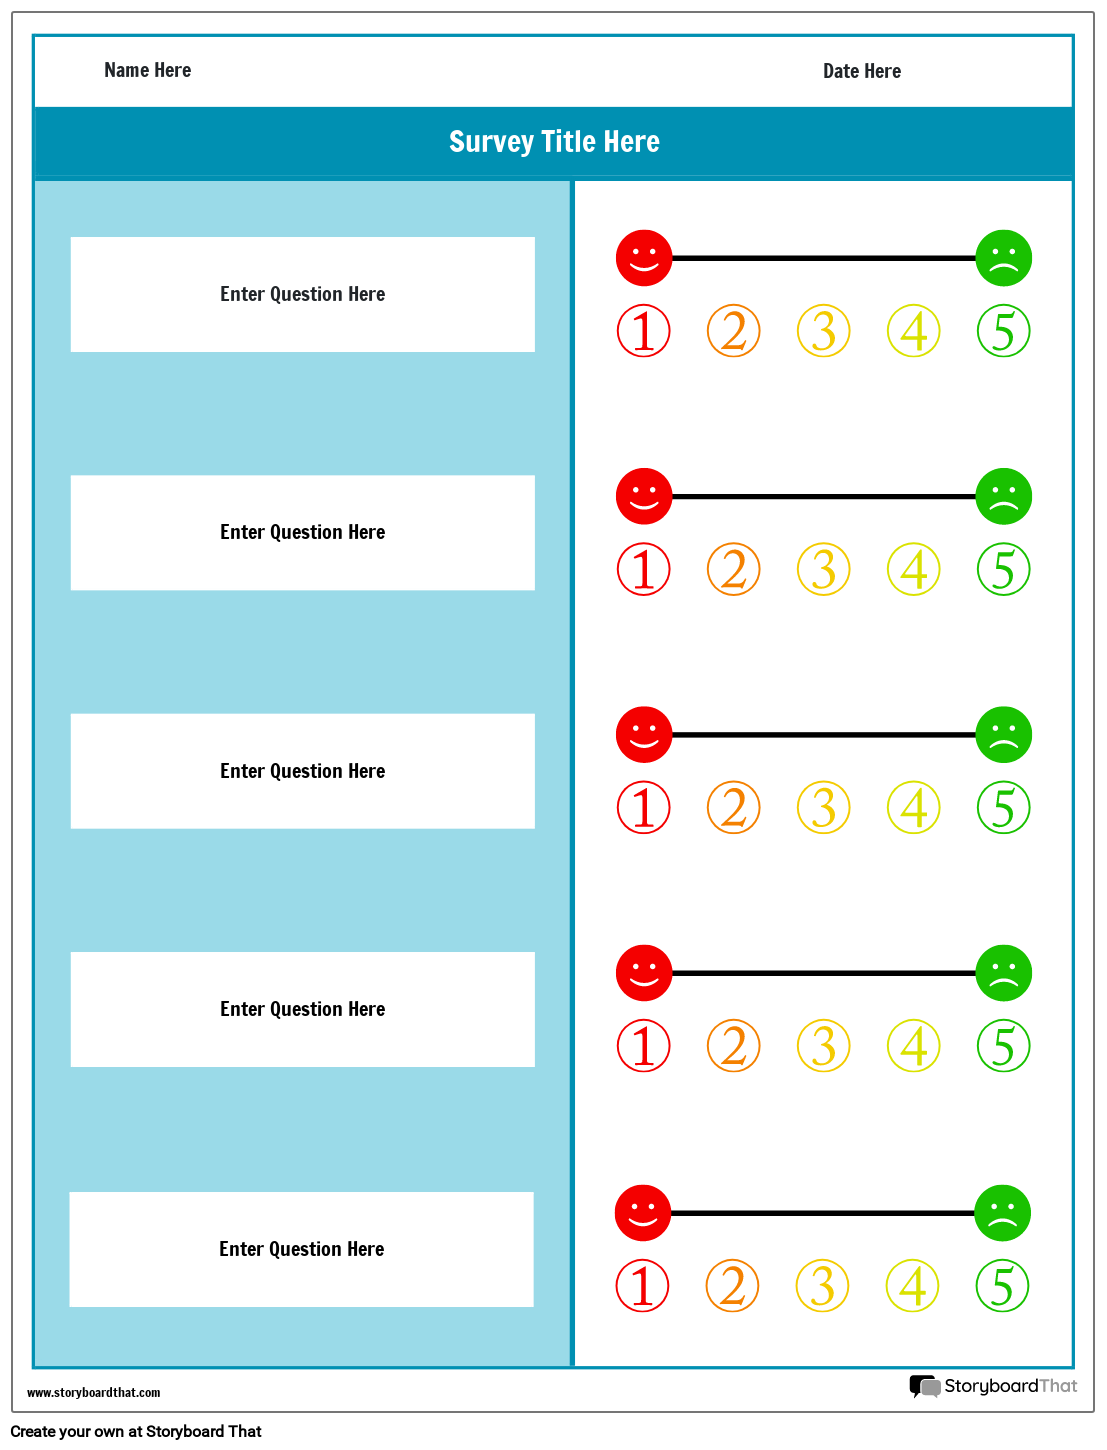 Survey Worksheet Design with Colorful Rating Scale